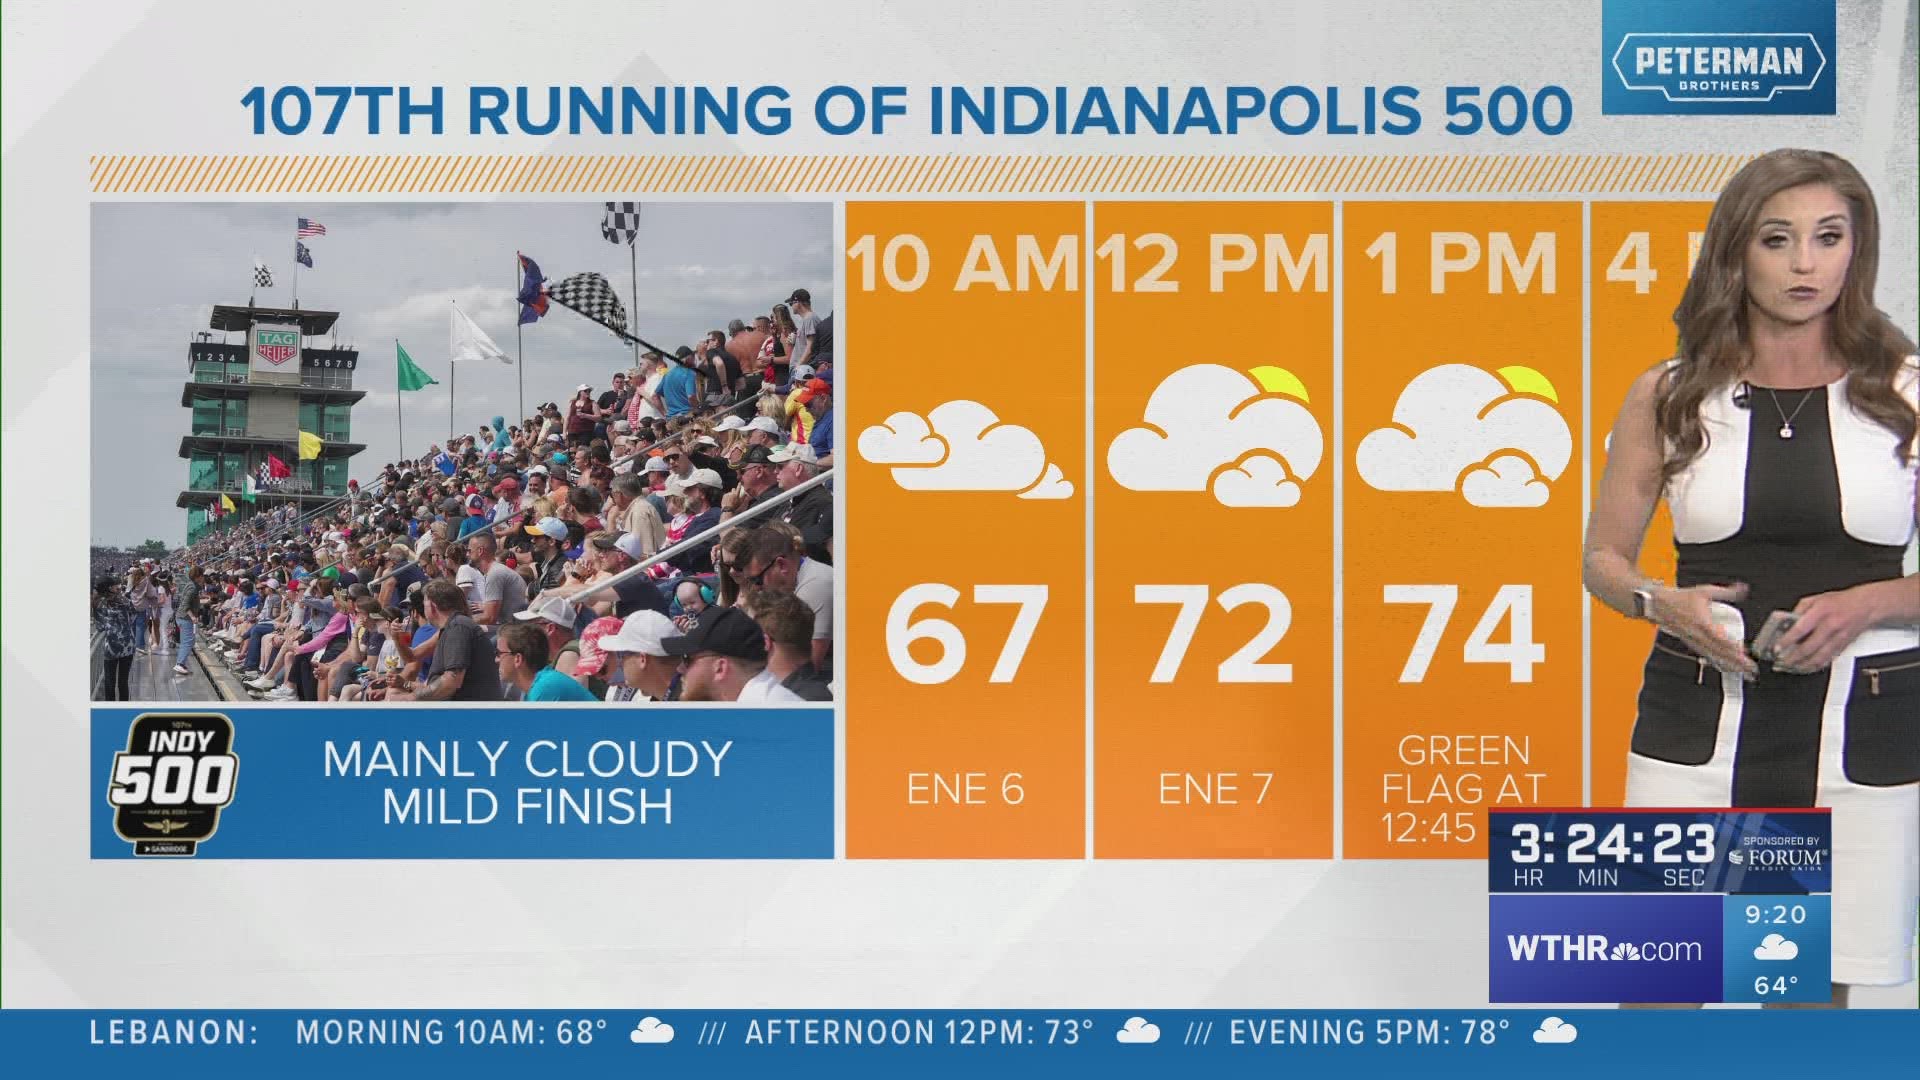 Race Day will be mostly cloudy, thanks to the system to the south.